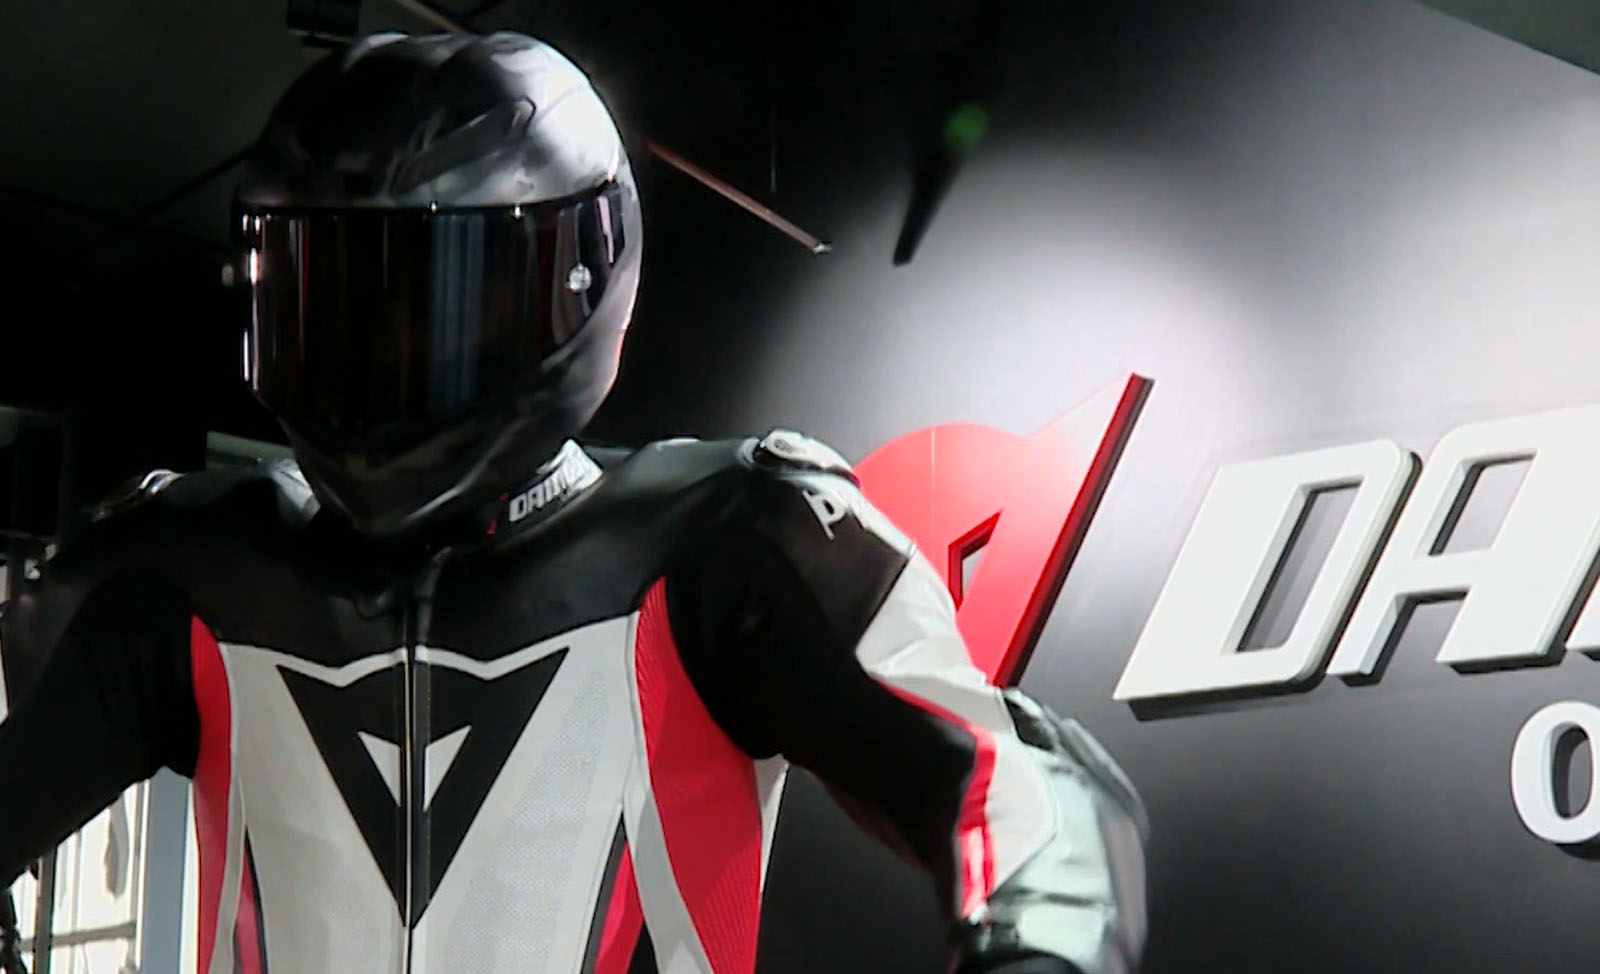 Dainese shows off new bike, technology at CES